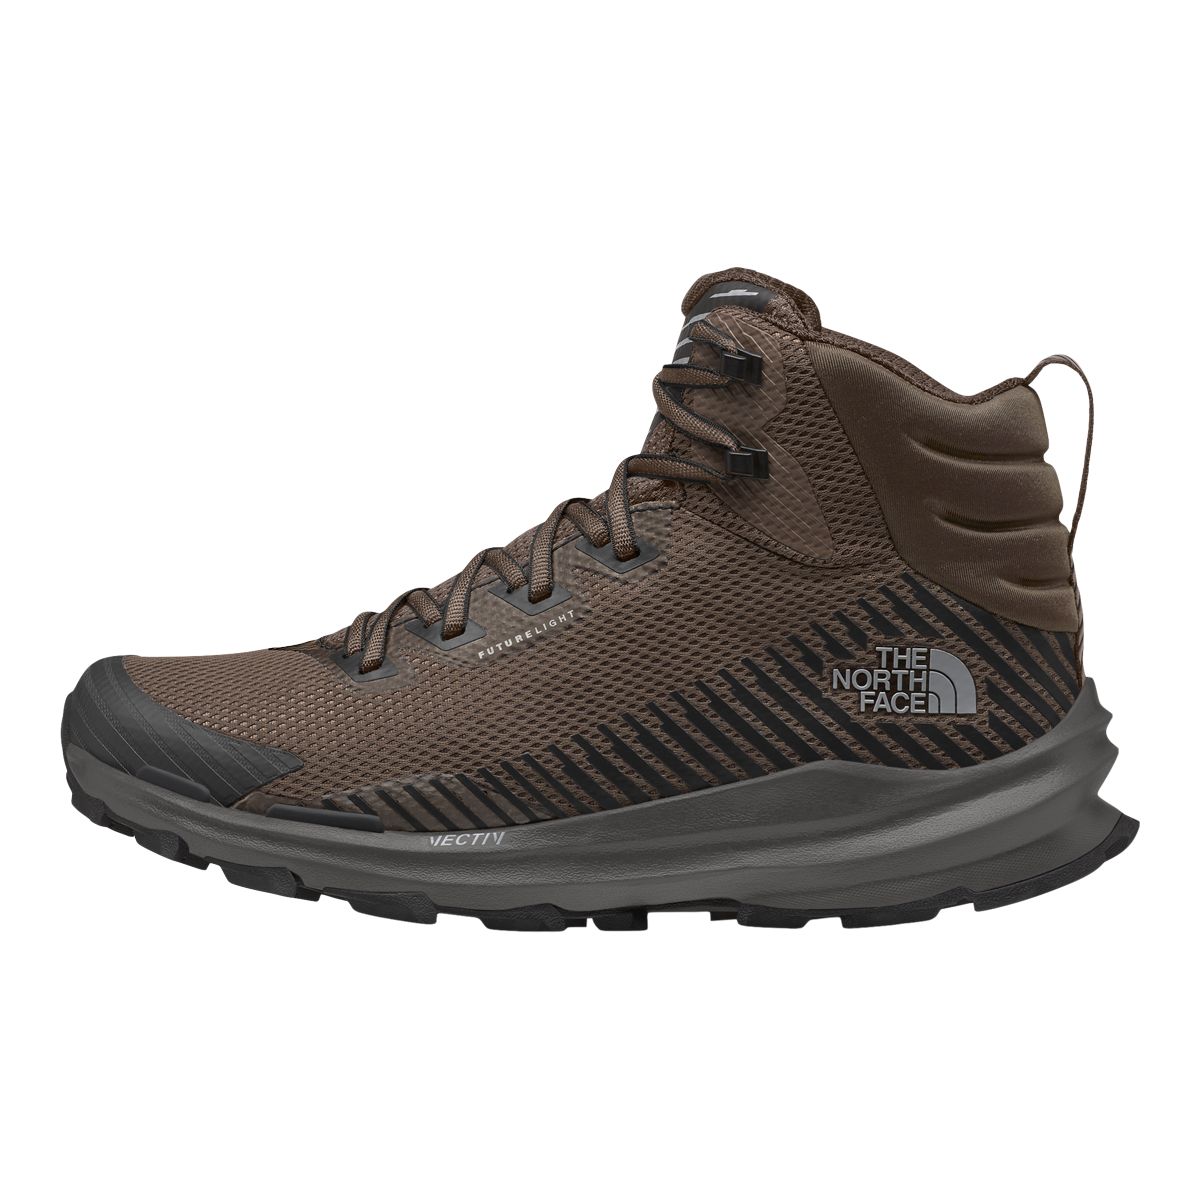 The North Face VECTIV Fastpack Mid FUTURELIGHT Hiking Boots | SportChek